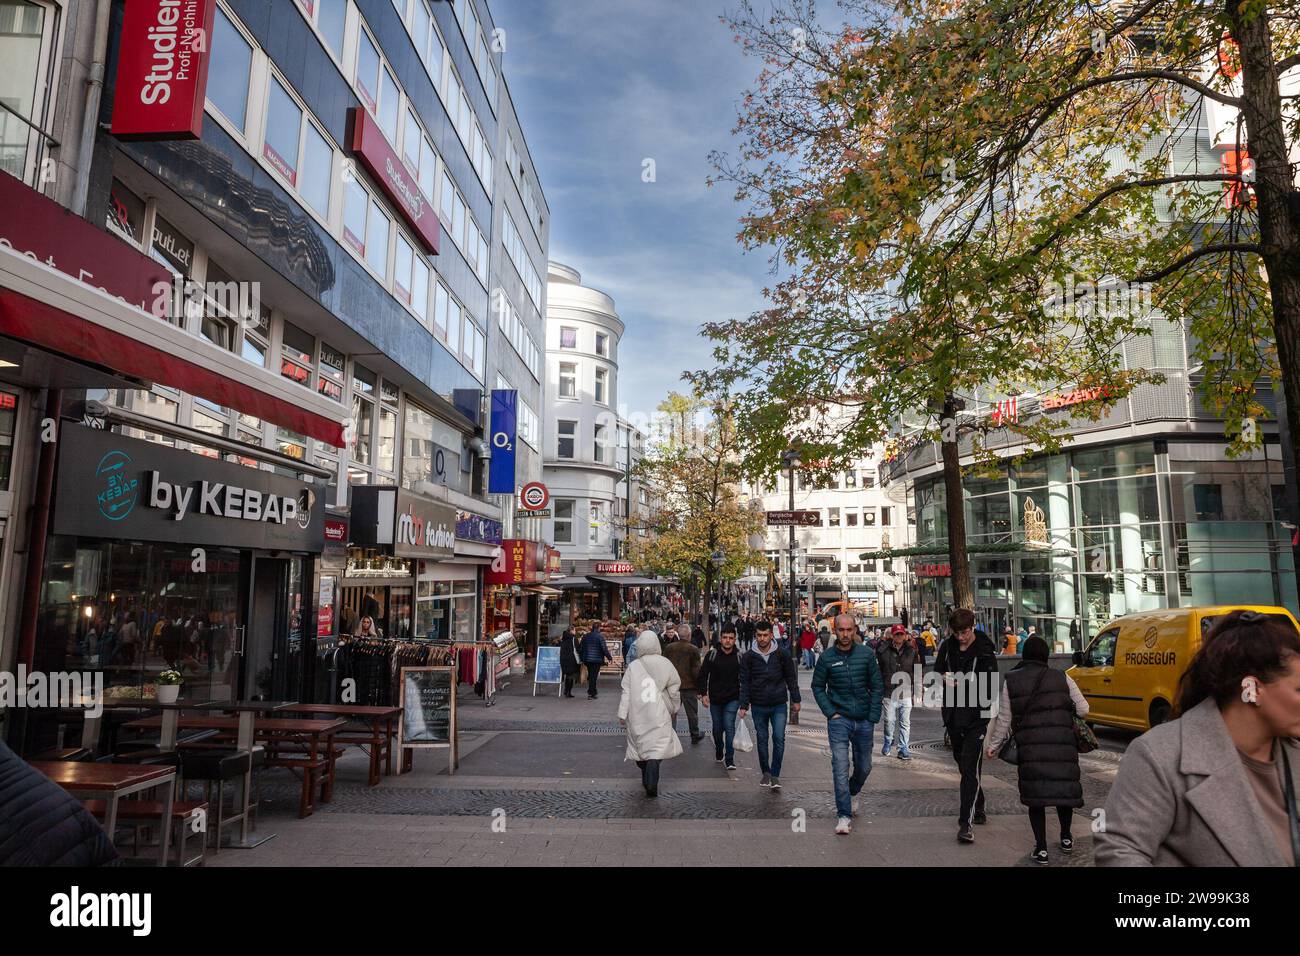 Picture of Alte Freiheit with stores and shops on an afternoon in Wuppertal, Germany. Alte Freiheit is the main shopping street in Wuppertal, Germany. Stock Photo